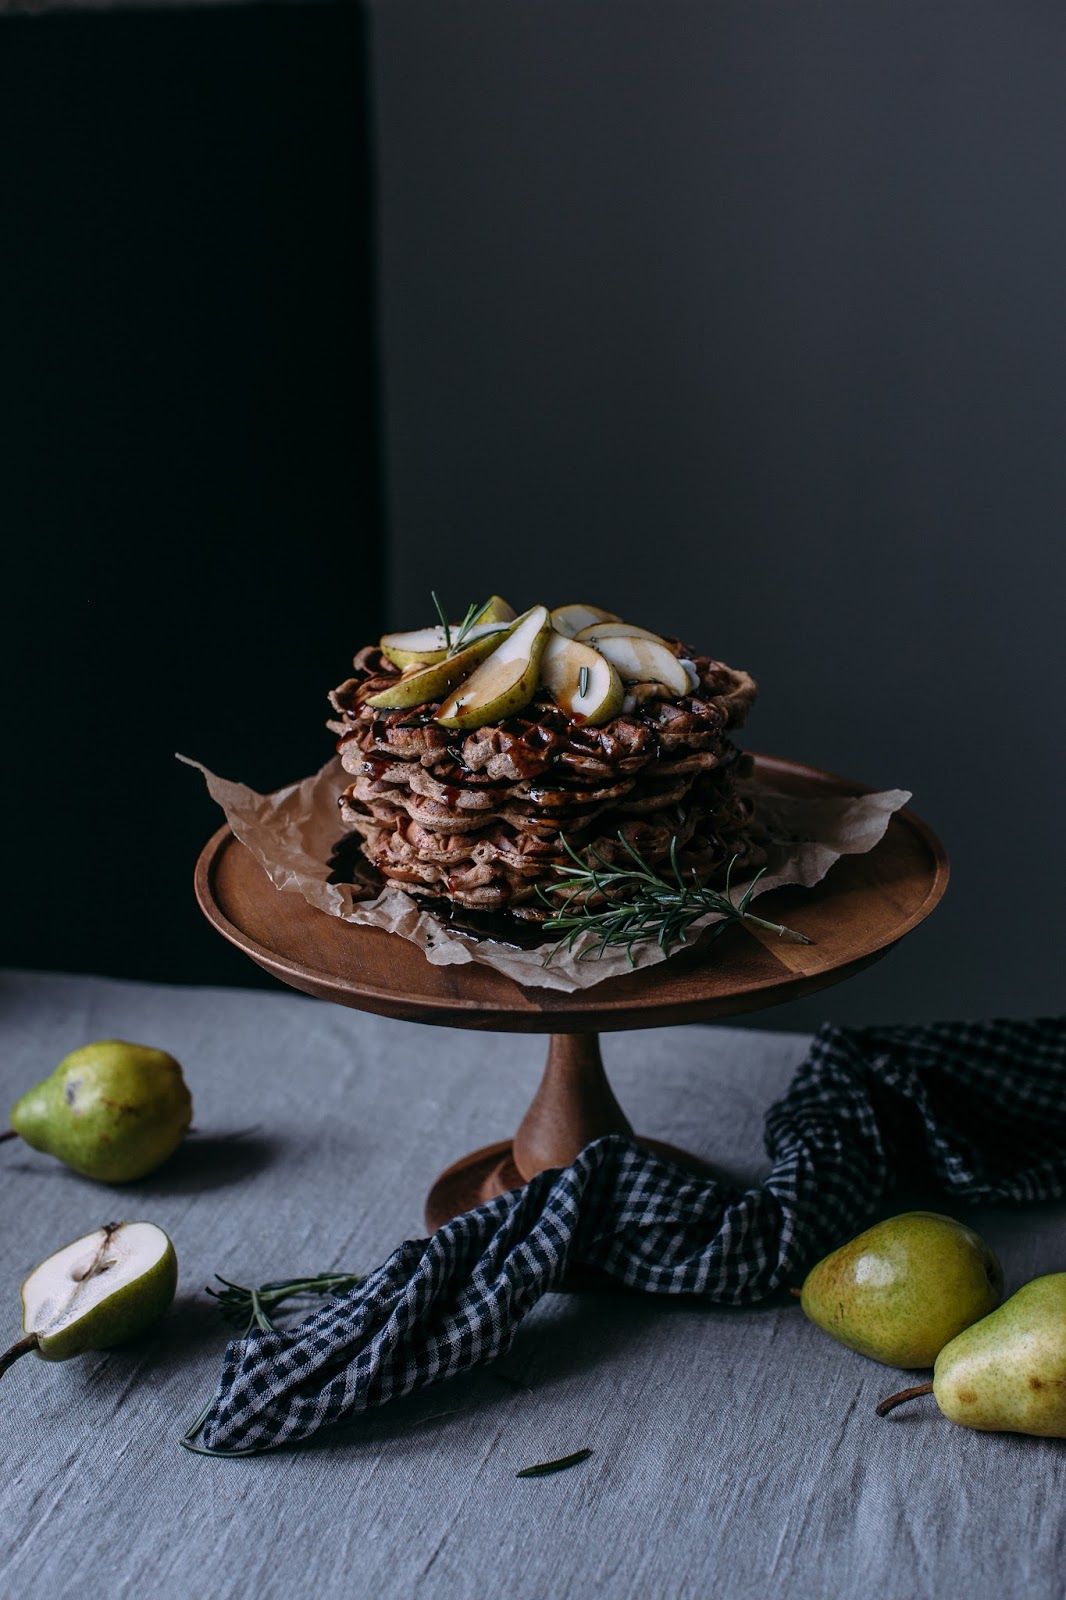 Gluten-free Apple-Cinnamon Waffles with Pears and a Tea infused Rosmary – Coconut Sugar Syrup